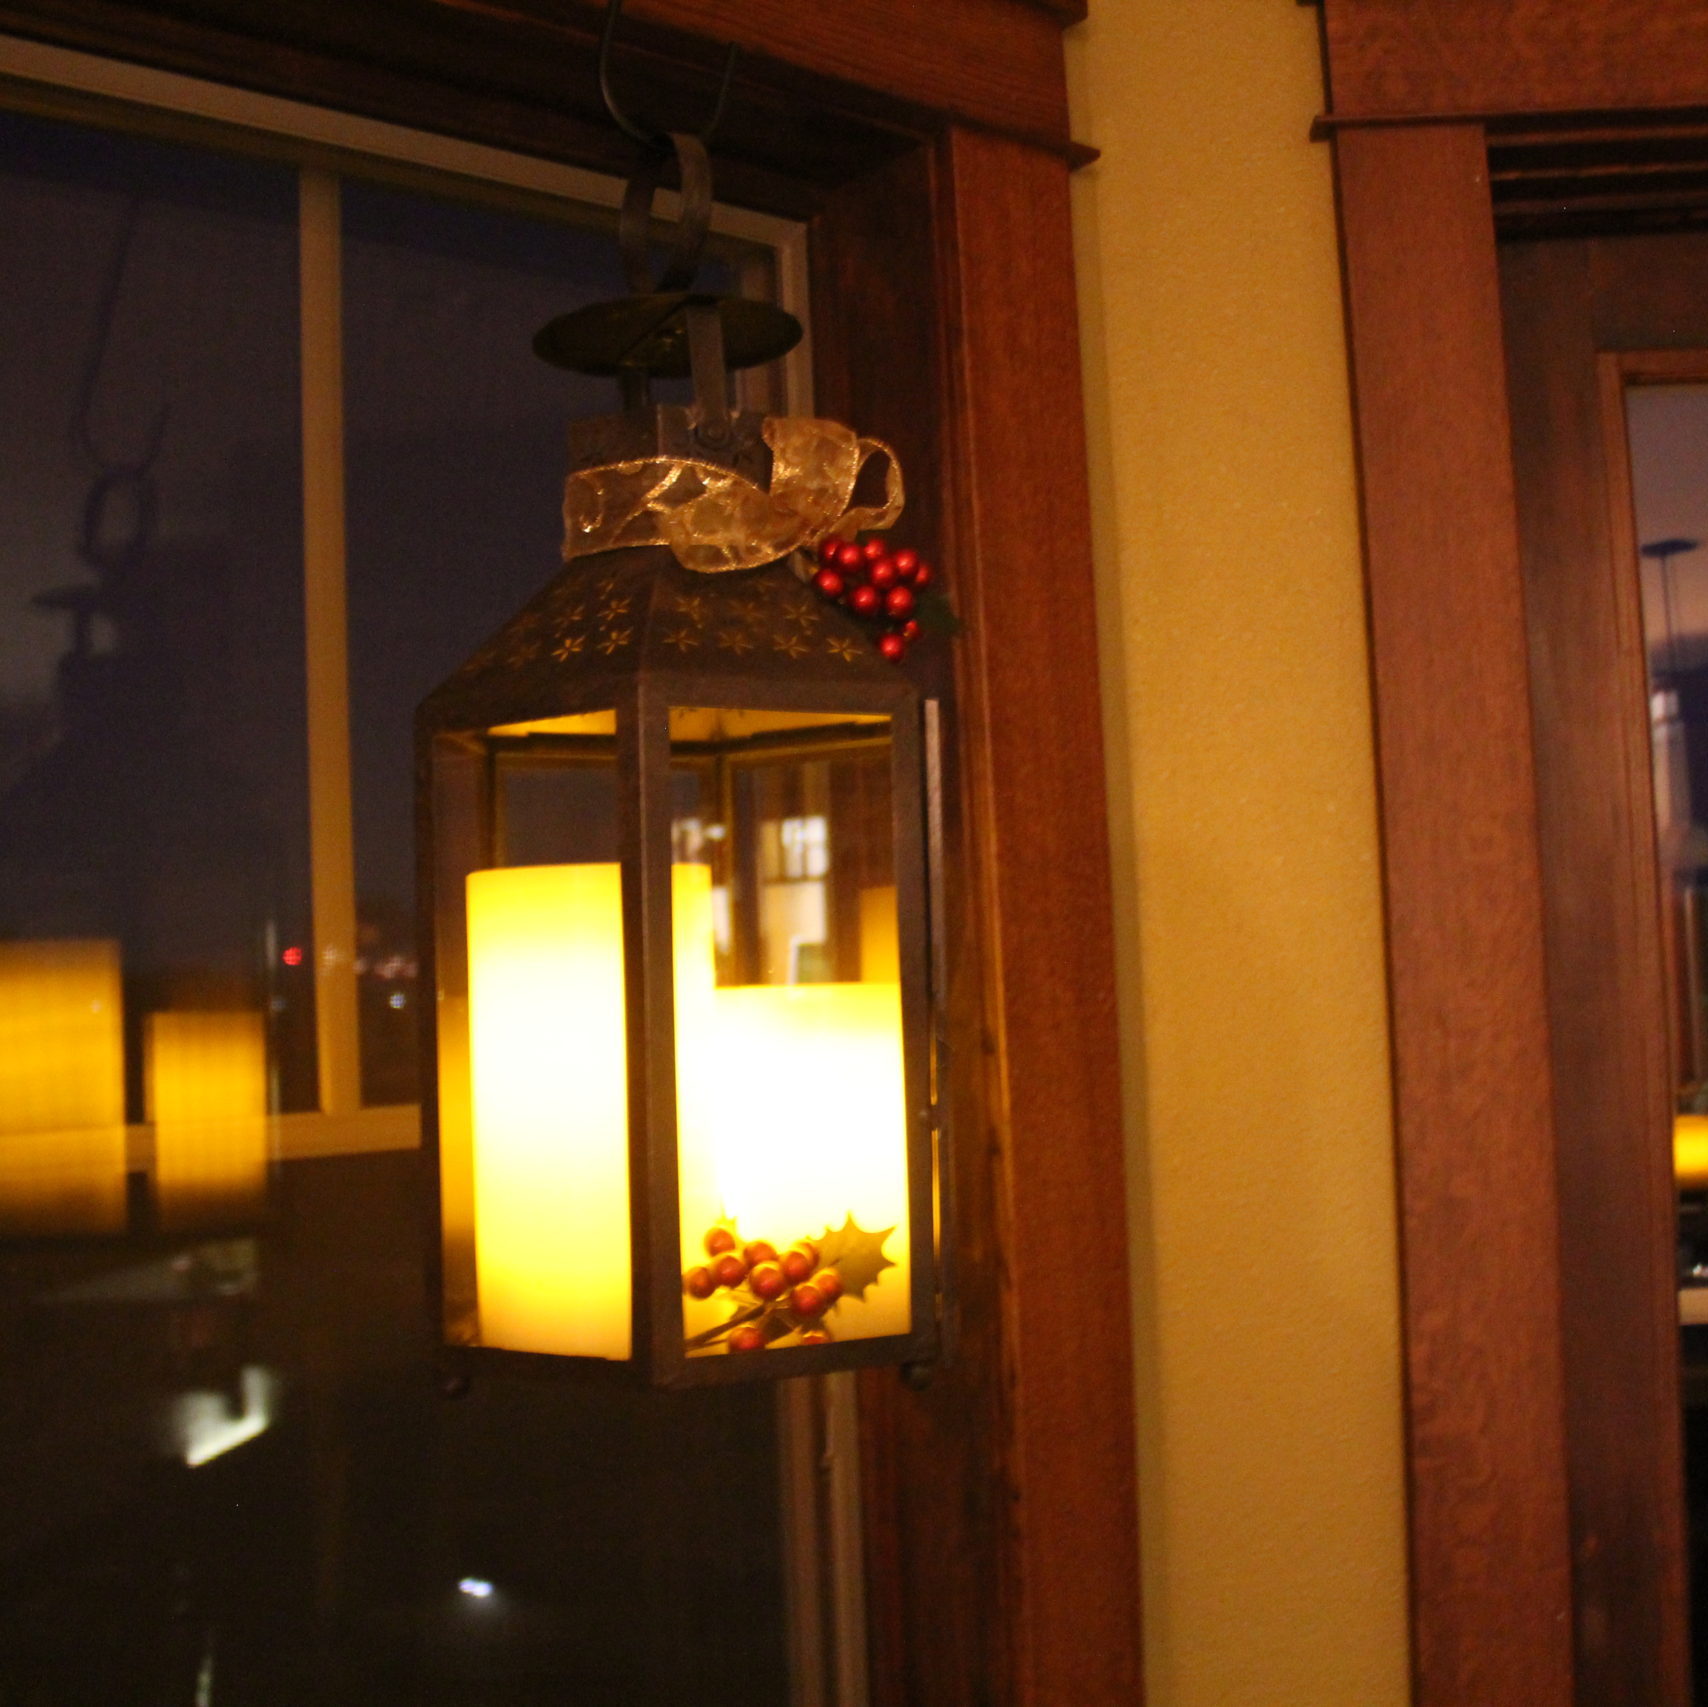 I like dressing up my lanterns for the holiday. Giving them a bow tie and glowing candles with springs of holly.